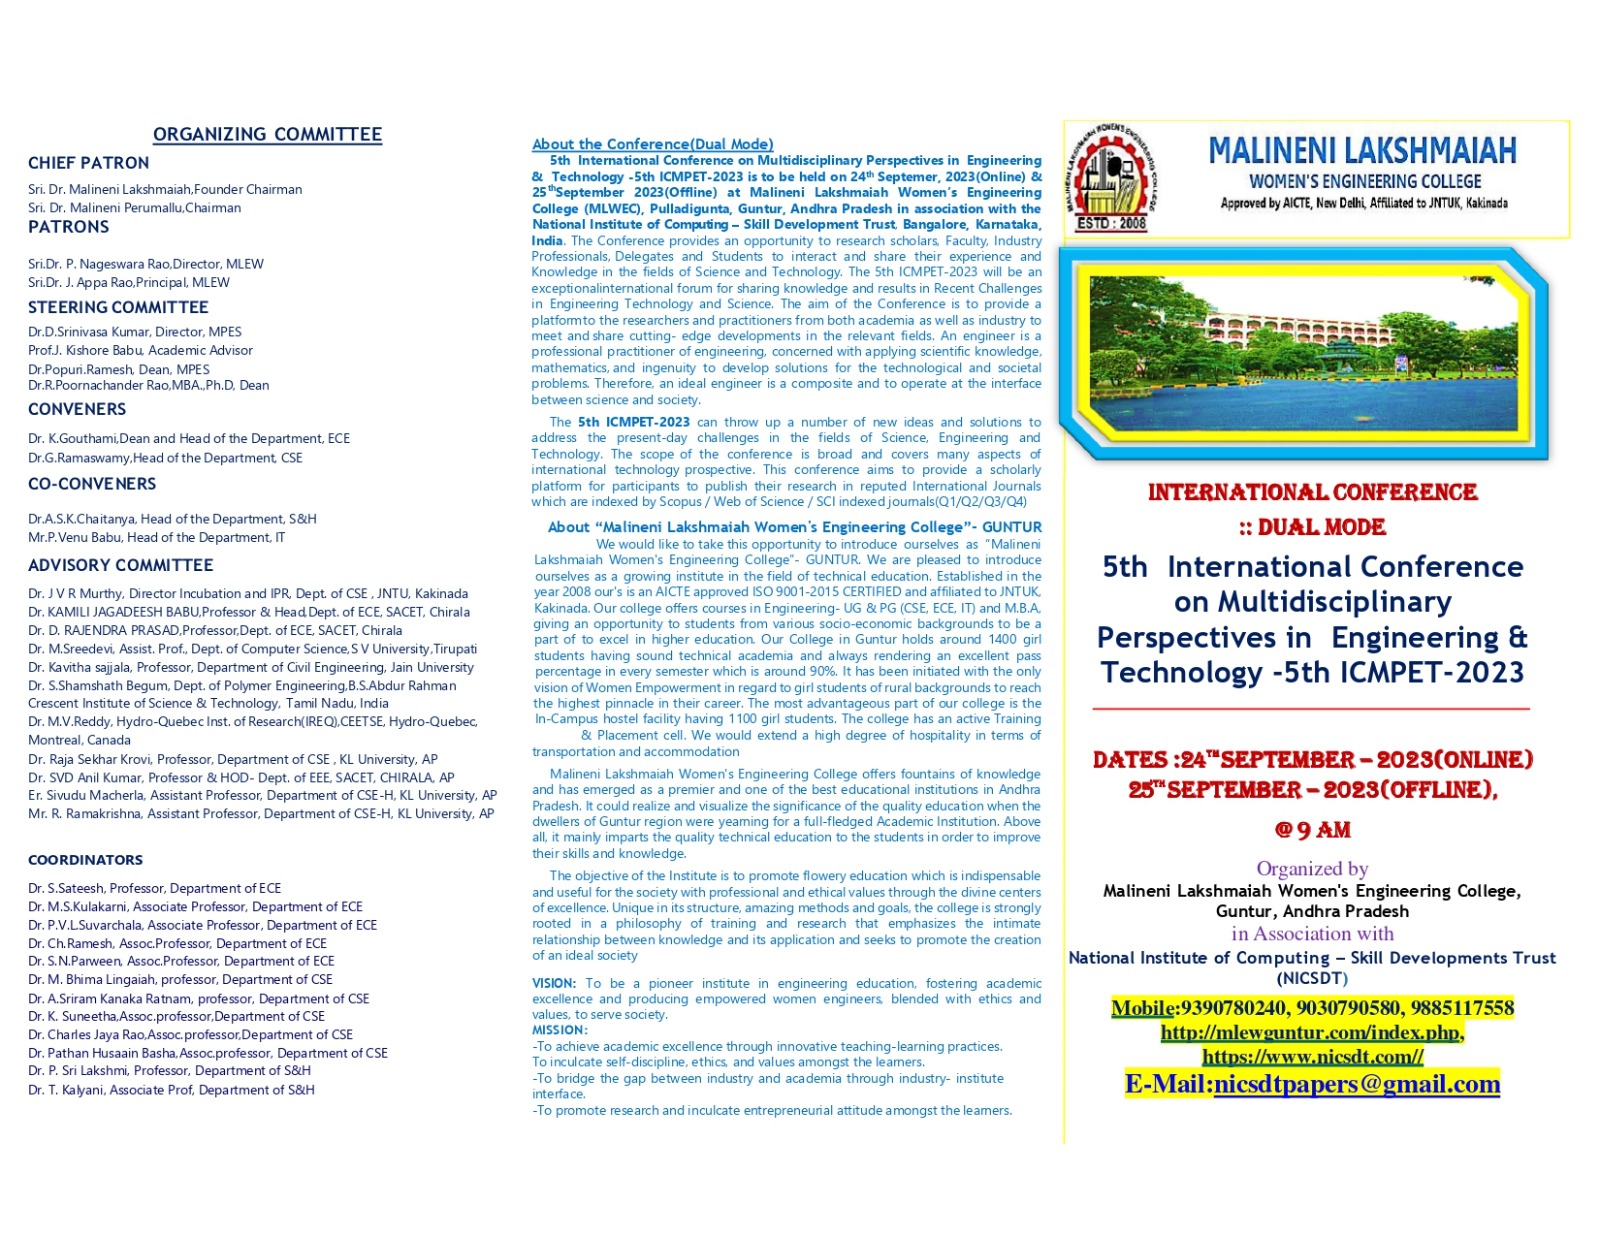 5th International Conference on Multidisciplinary Perspectives in Engineering and Technology (5th ICMPET 2023 - Dual Mode)